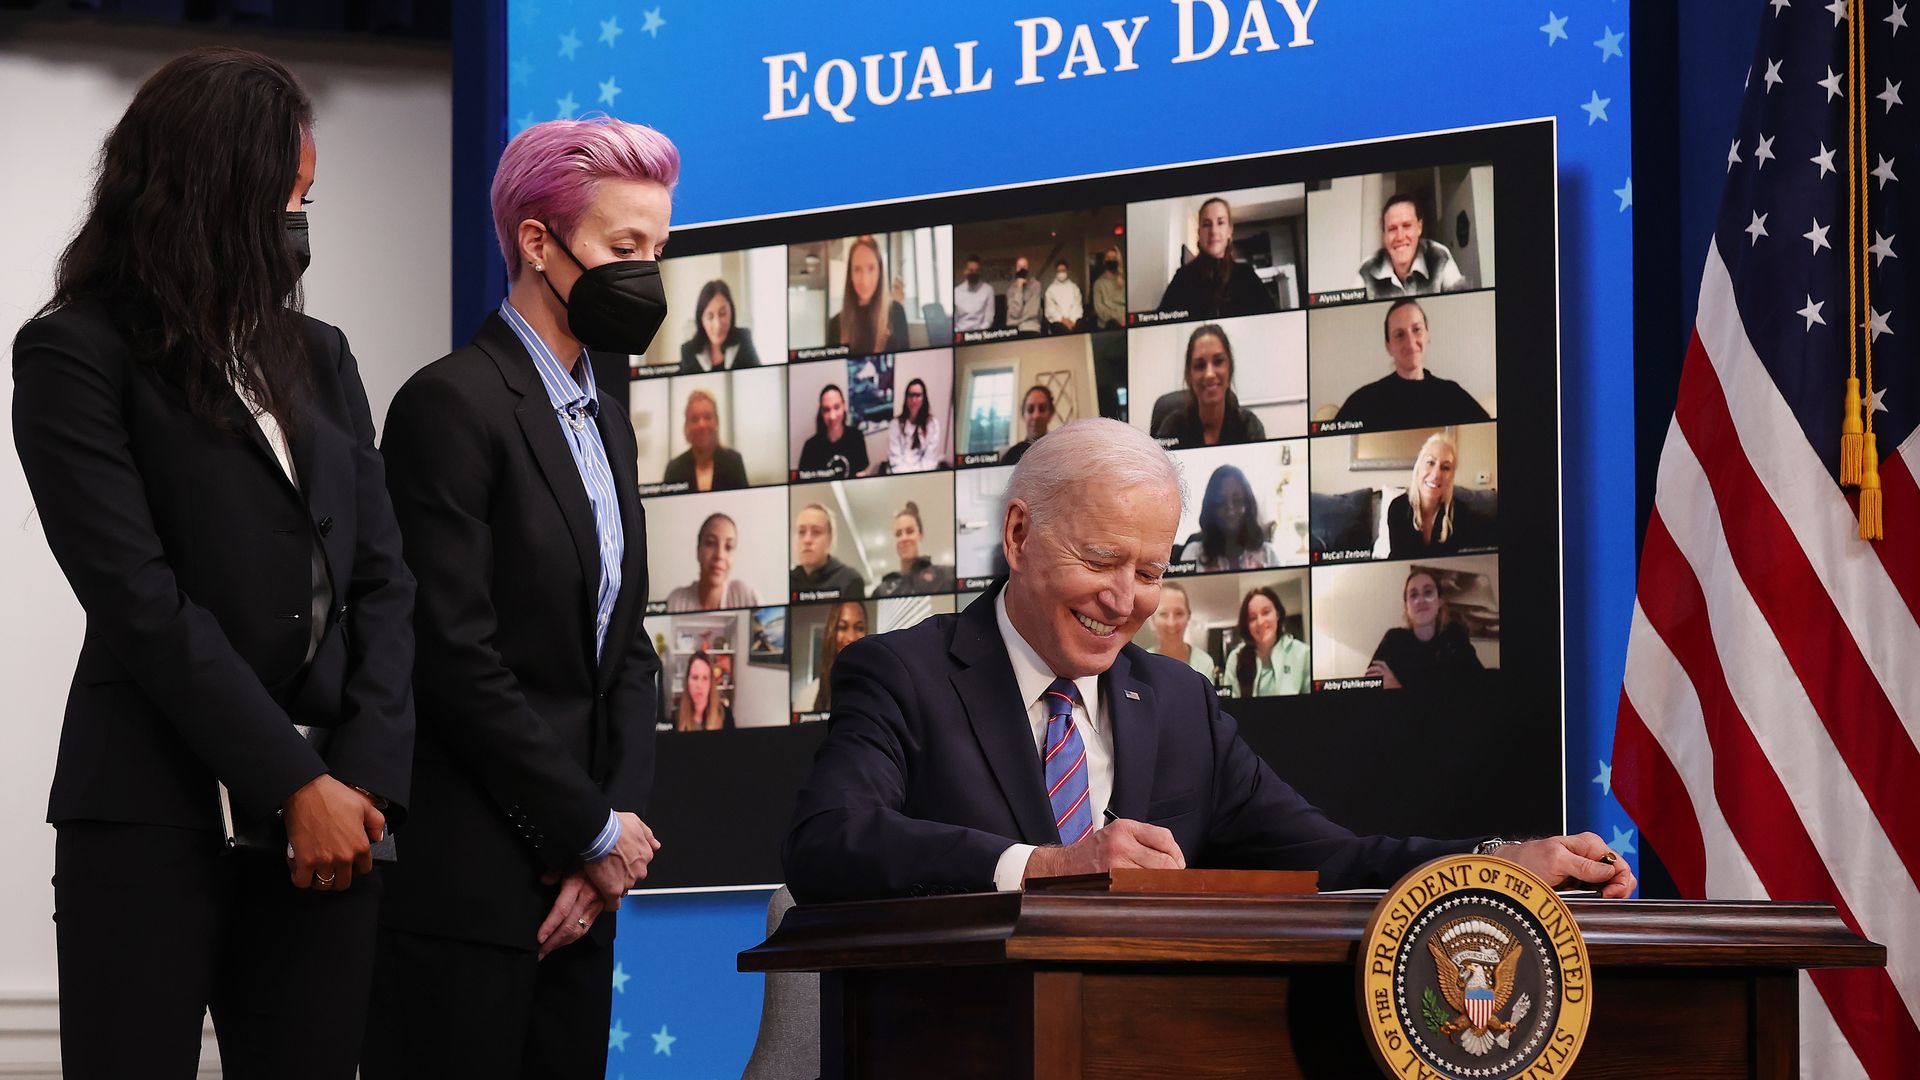 Soccer players Margaret Purce and Megan Rapinoe with President Biden in the Eisenhower Executive Office Building on March 24.